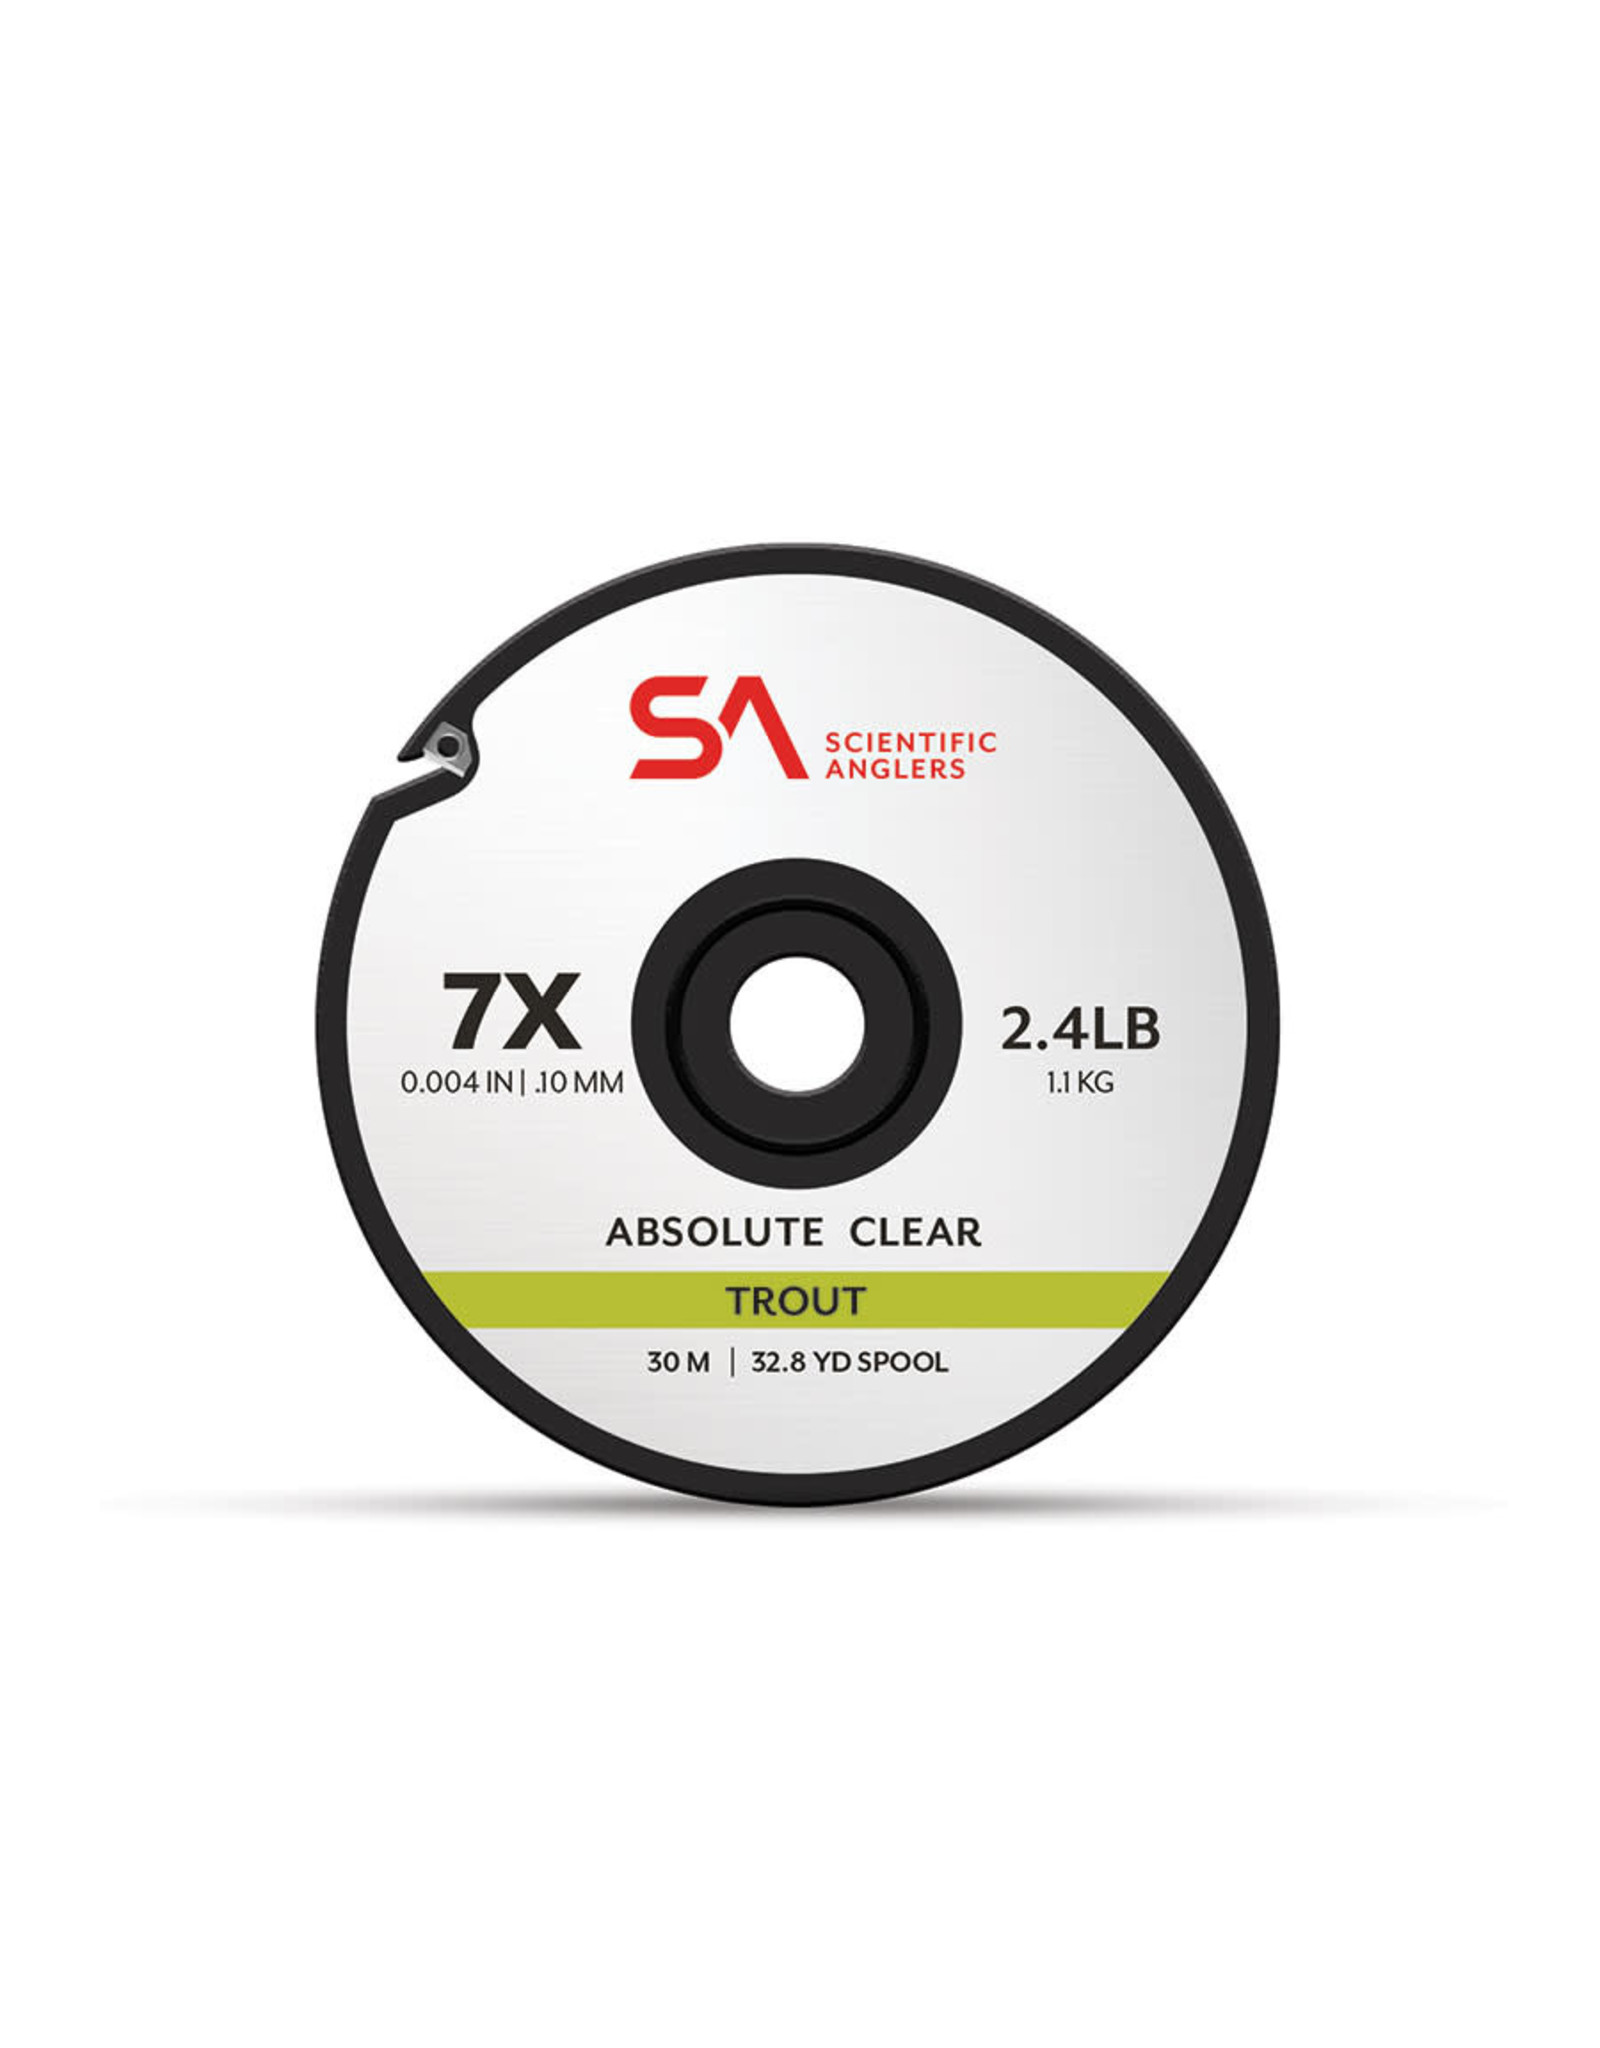 SCIENTIFIC ANGLERS Absolute Clear Trout Tippet 30M